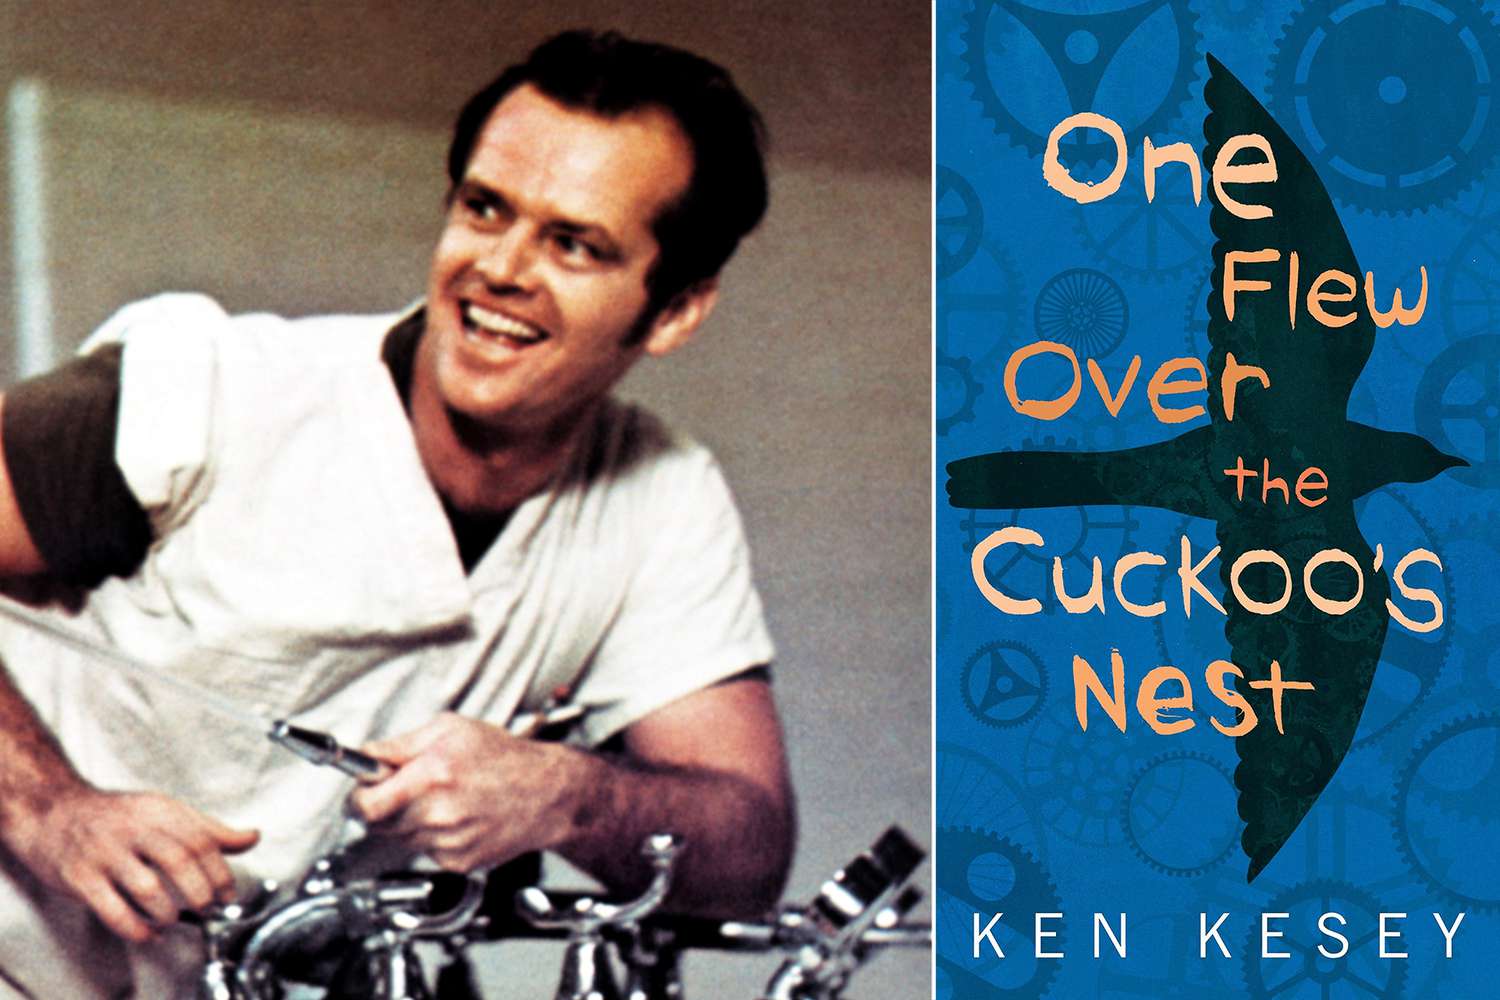 One Flew Over the Cuckoo's Nest and One Flew Over the Cuckoo's Nest (1975)